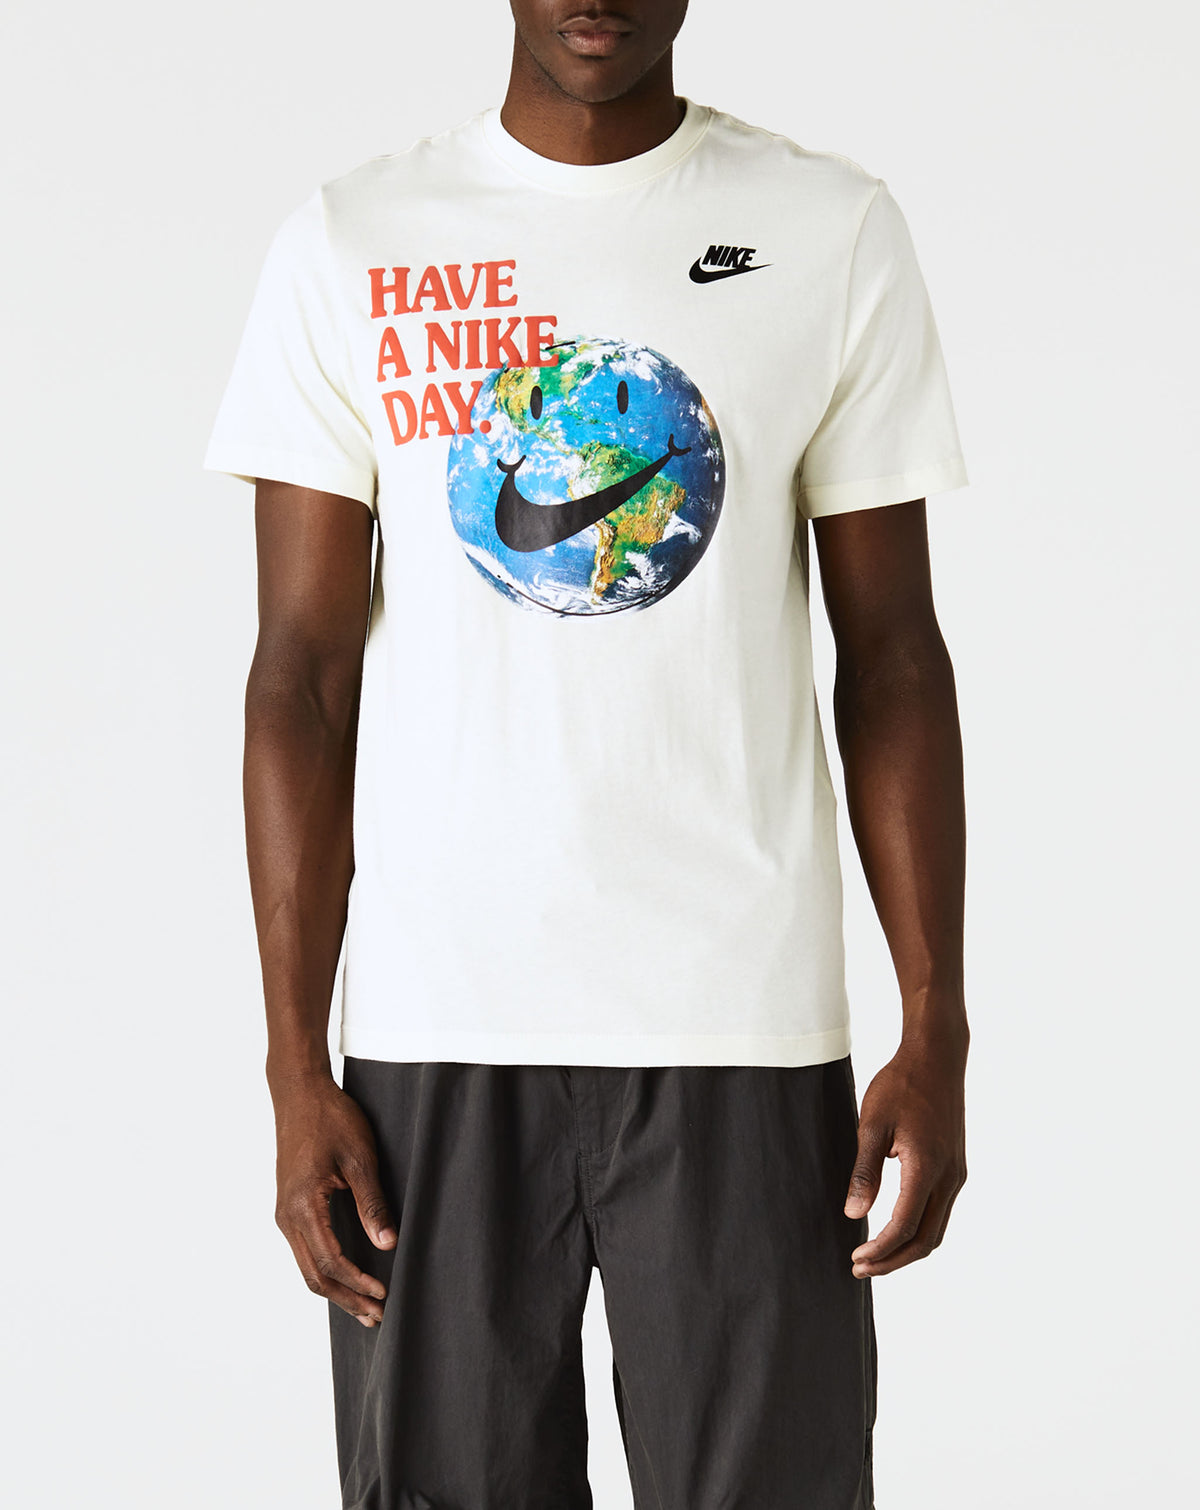 Nike Have A Nike Day T-Shirt - Rule of Next Apparel